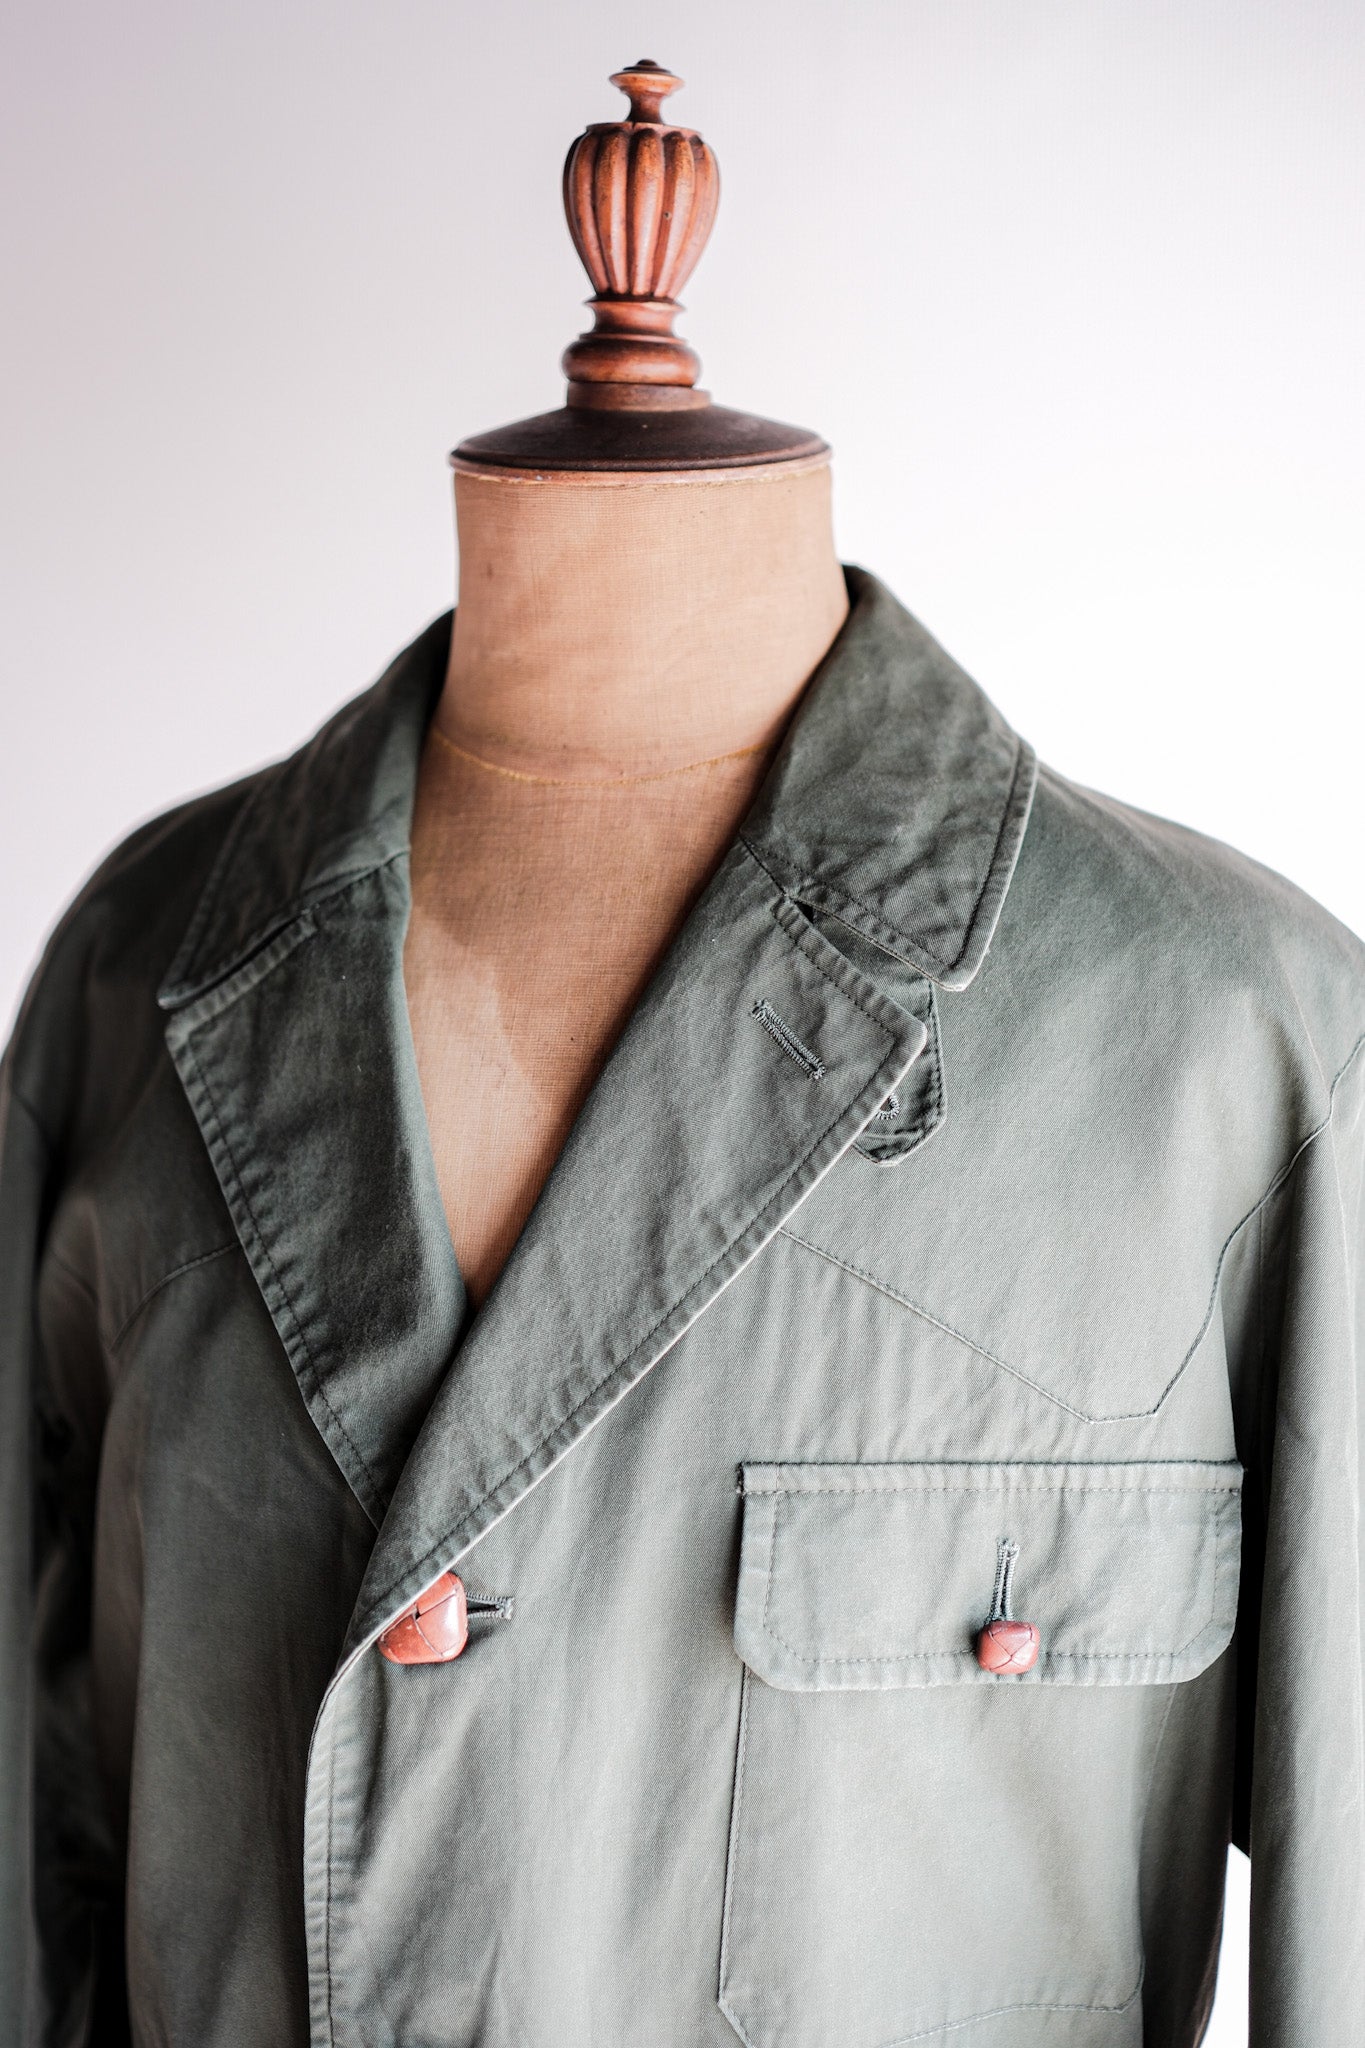 [~ 60's] Vintage Grenfell Shooter Veste Taille.42 "Mountain Tag"